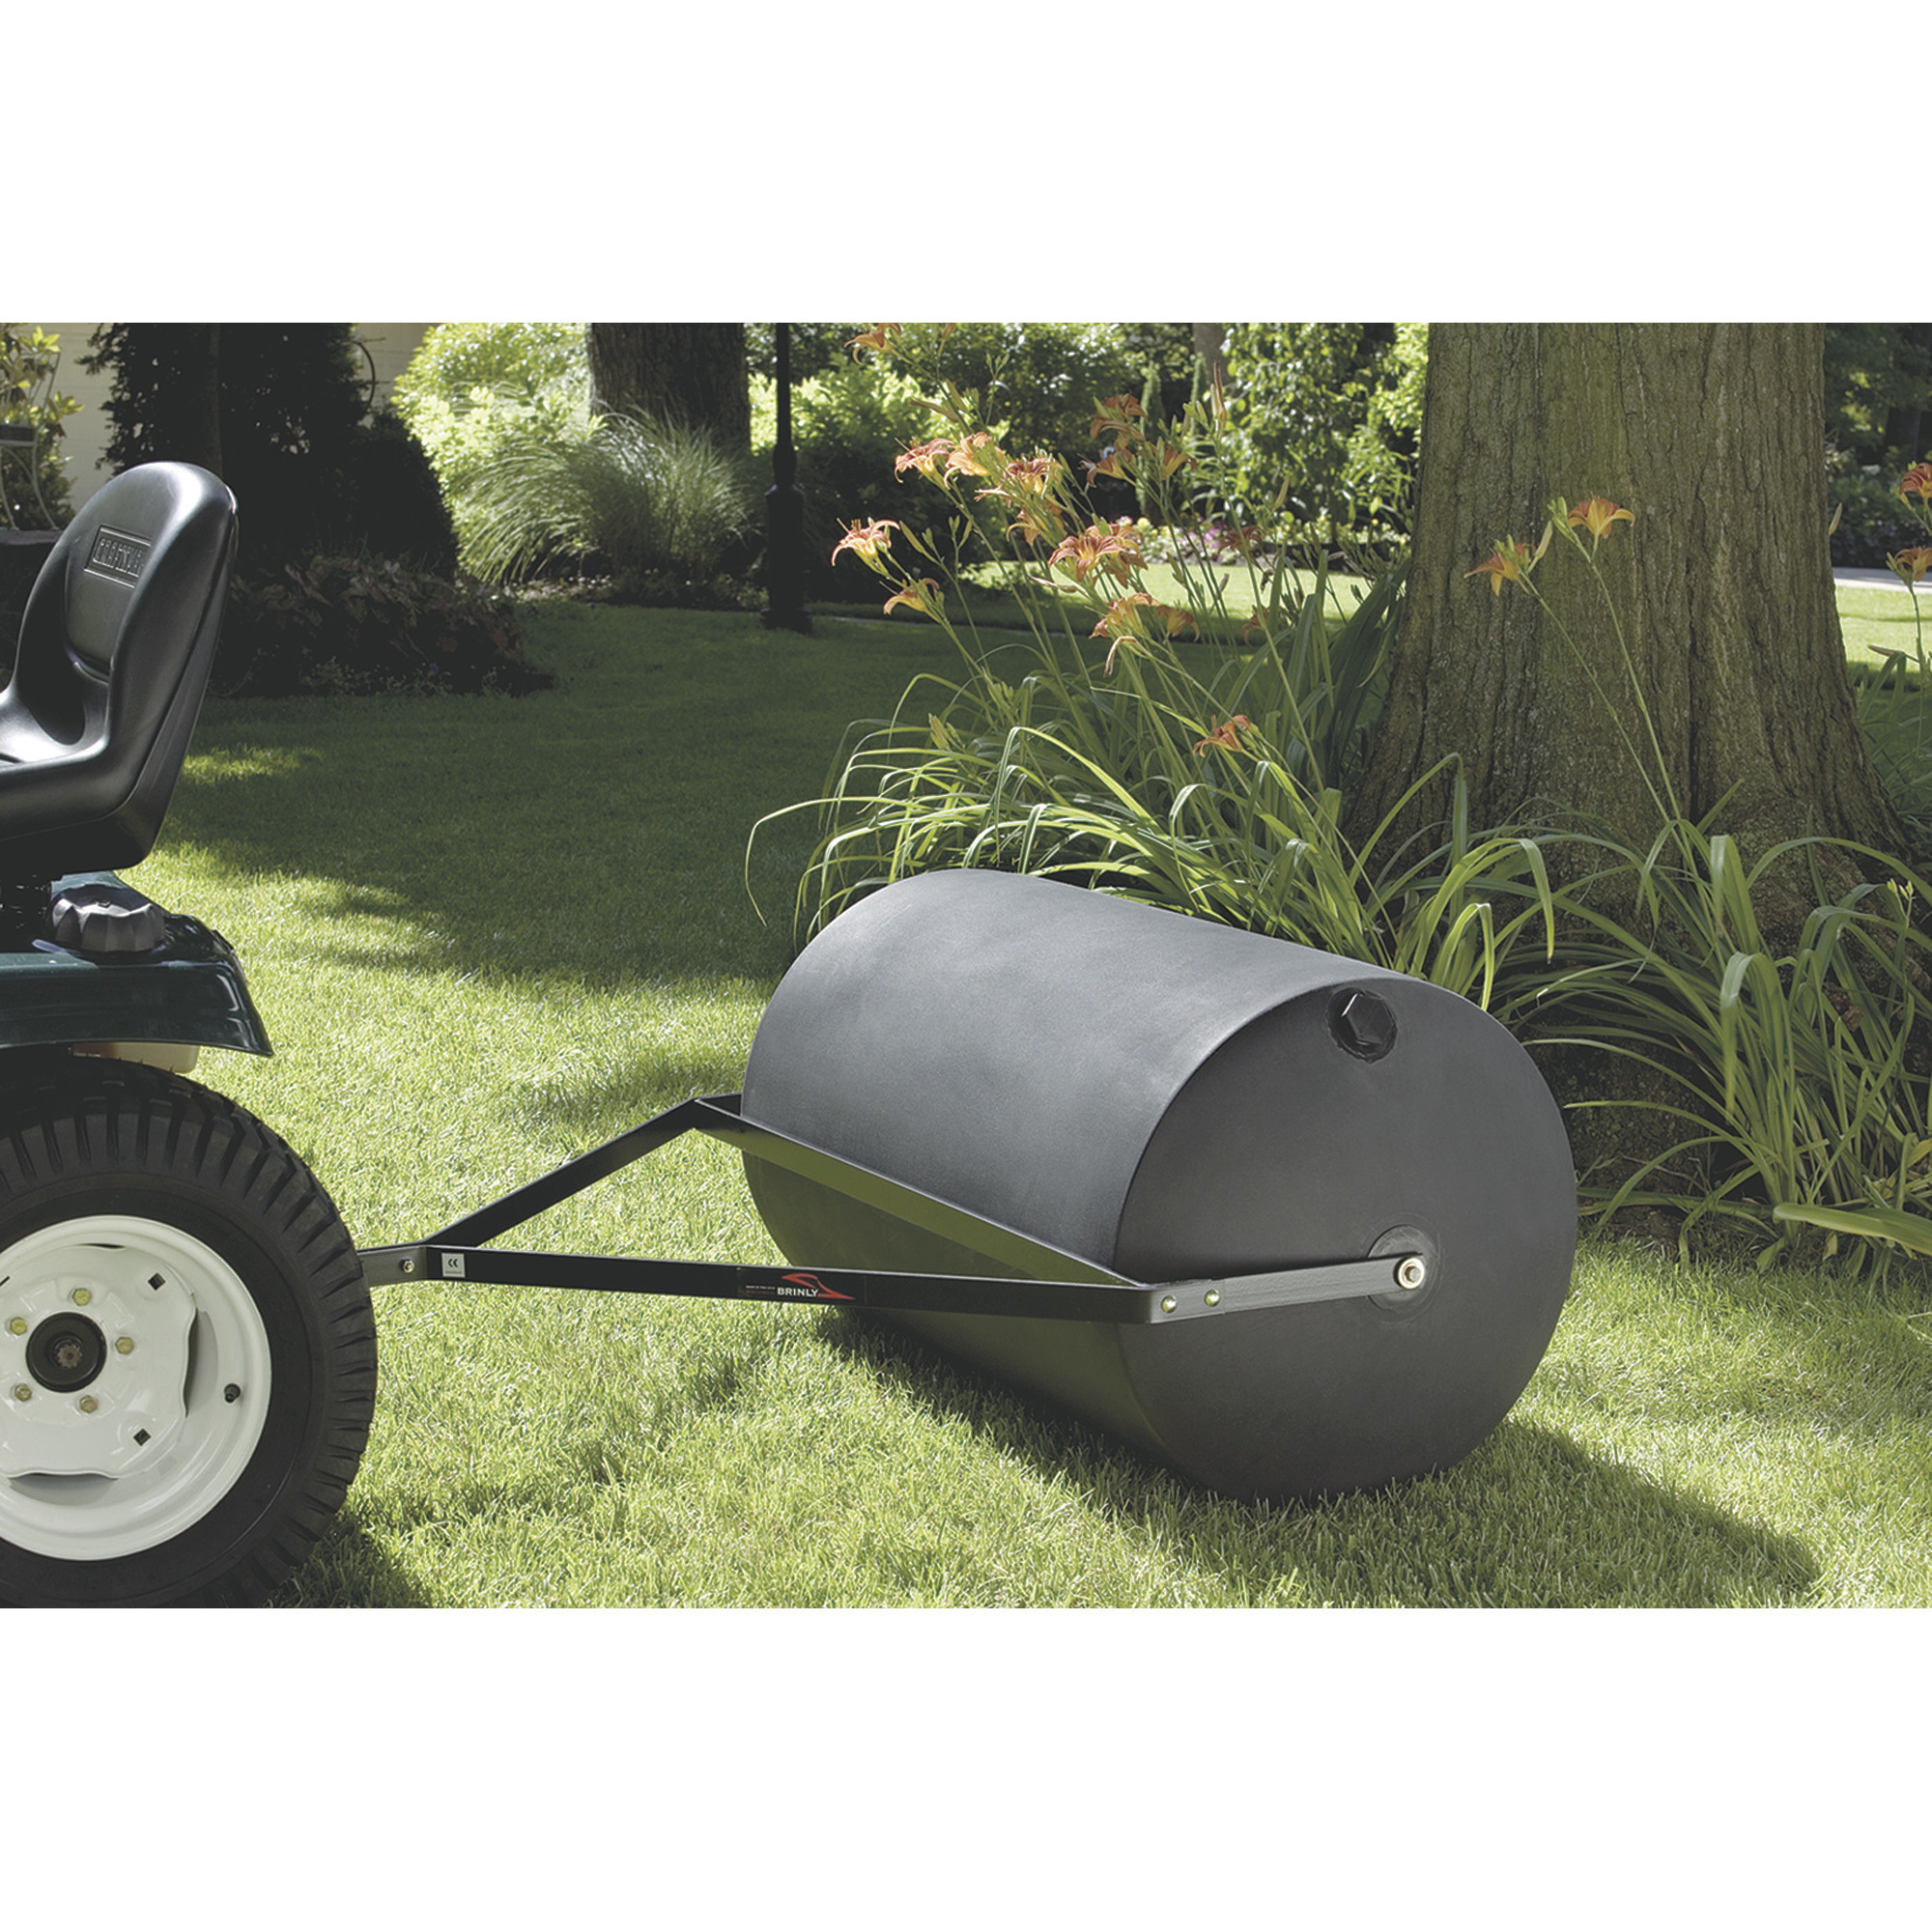 Brinly-Hardy Tow-Behind Poly Lawn Roller, 690 Lbs., Model PRT-36BH